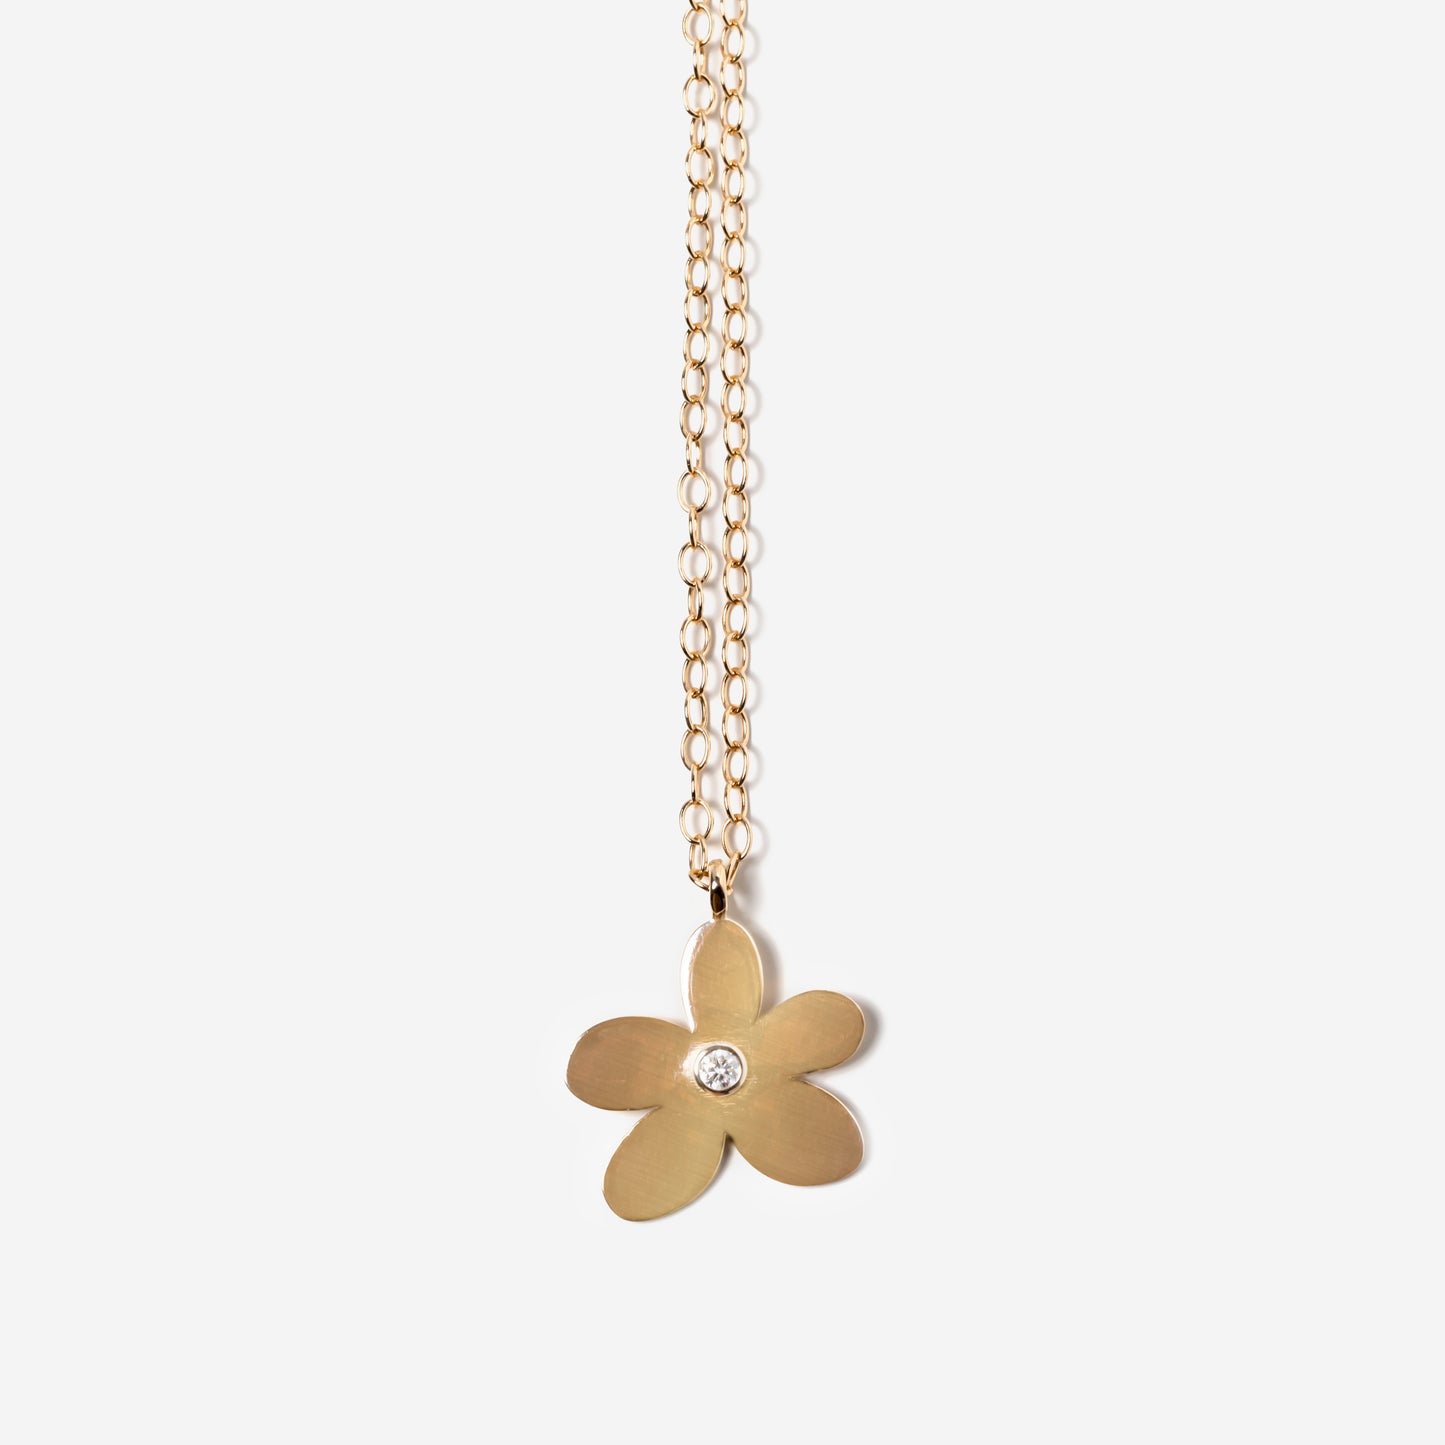 Large Daisy Flower Pendant on Gold Chain